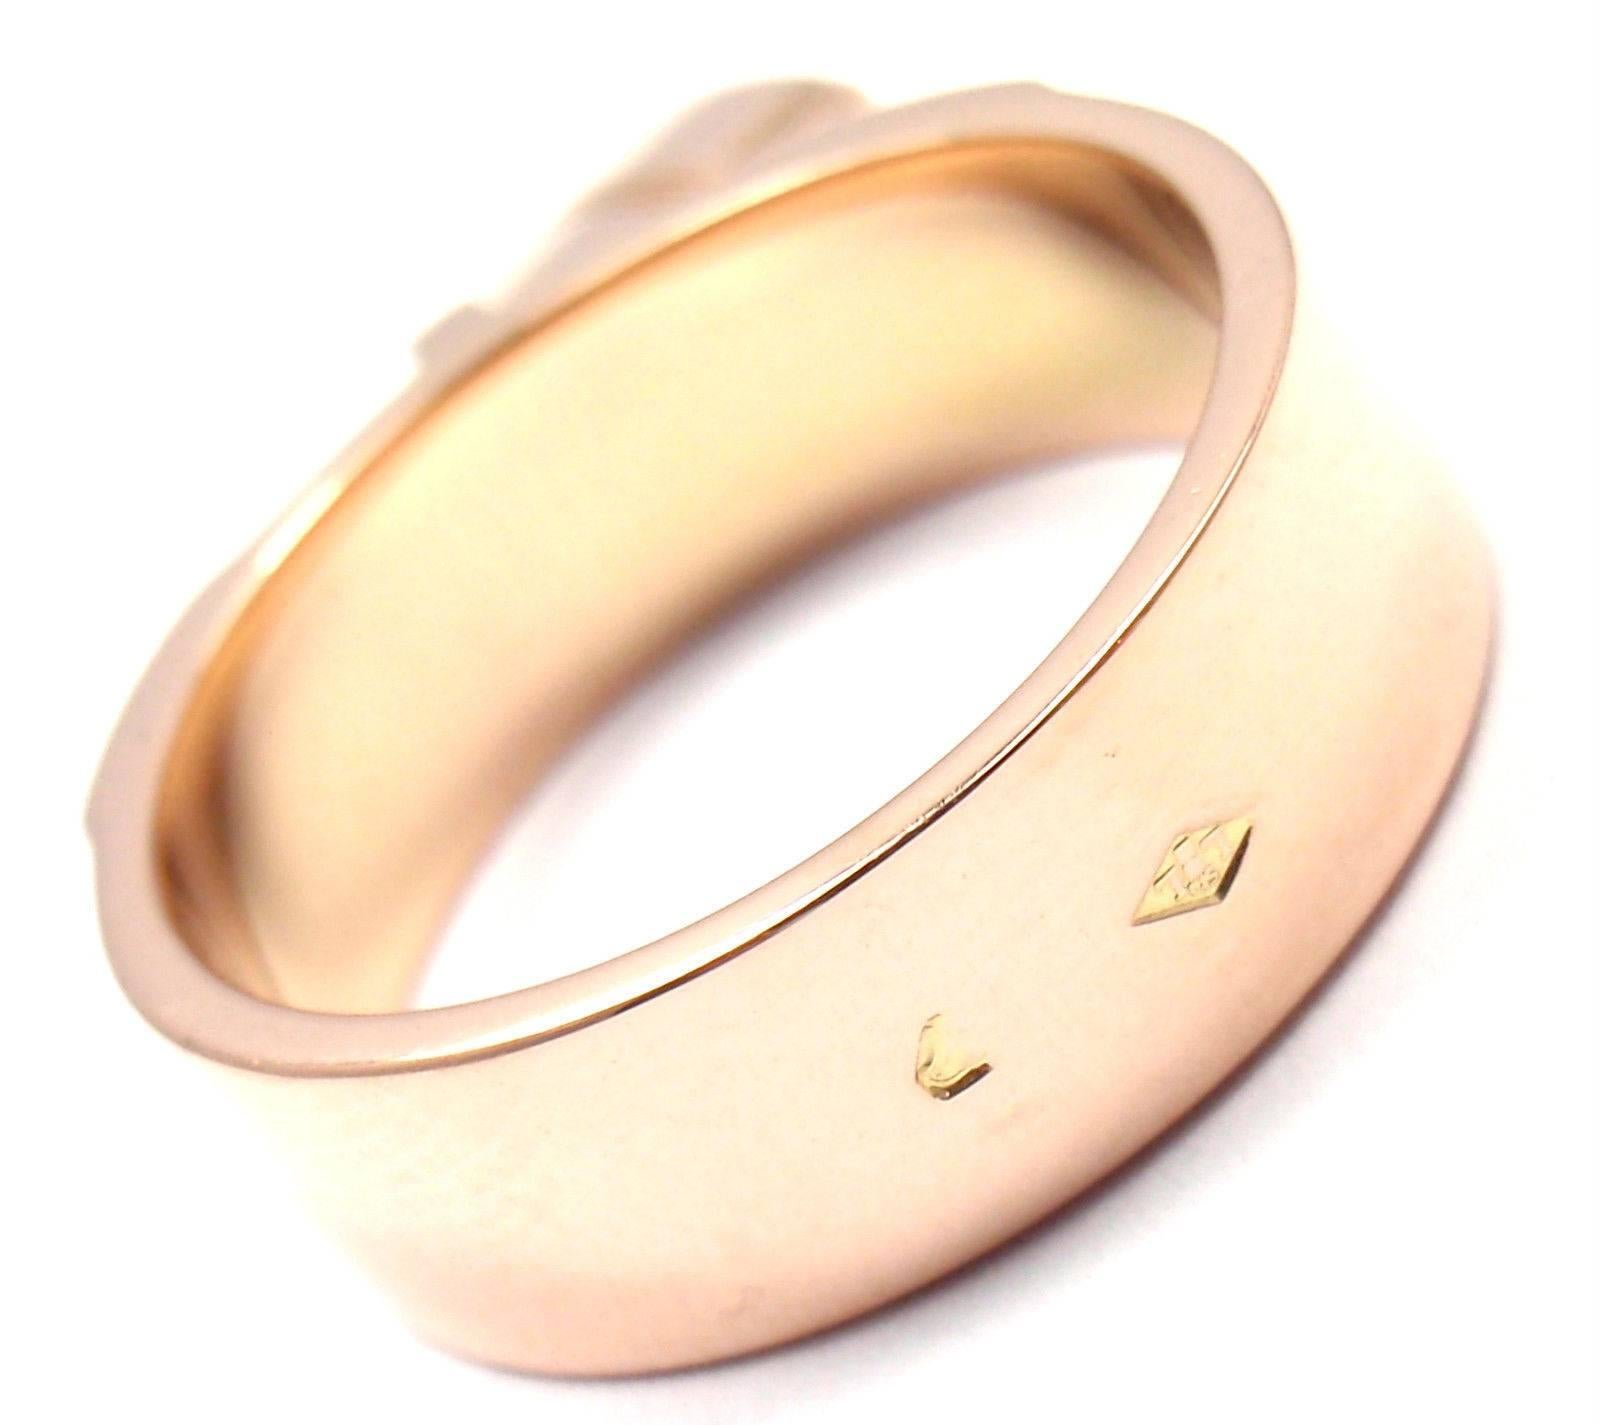 Hermes Collier De Chien Lock Rose Gold Band Ring In New Condition For Sale In Holland, PA